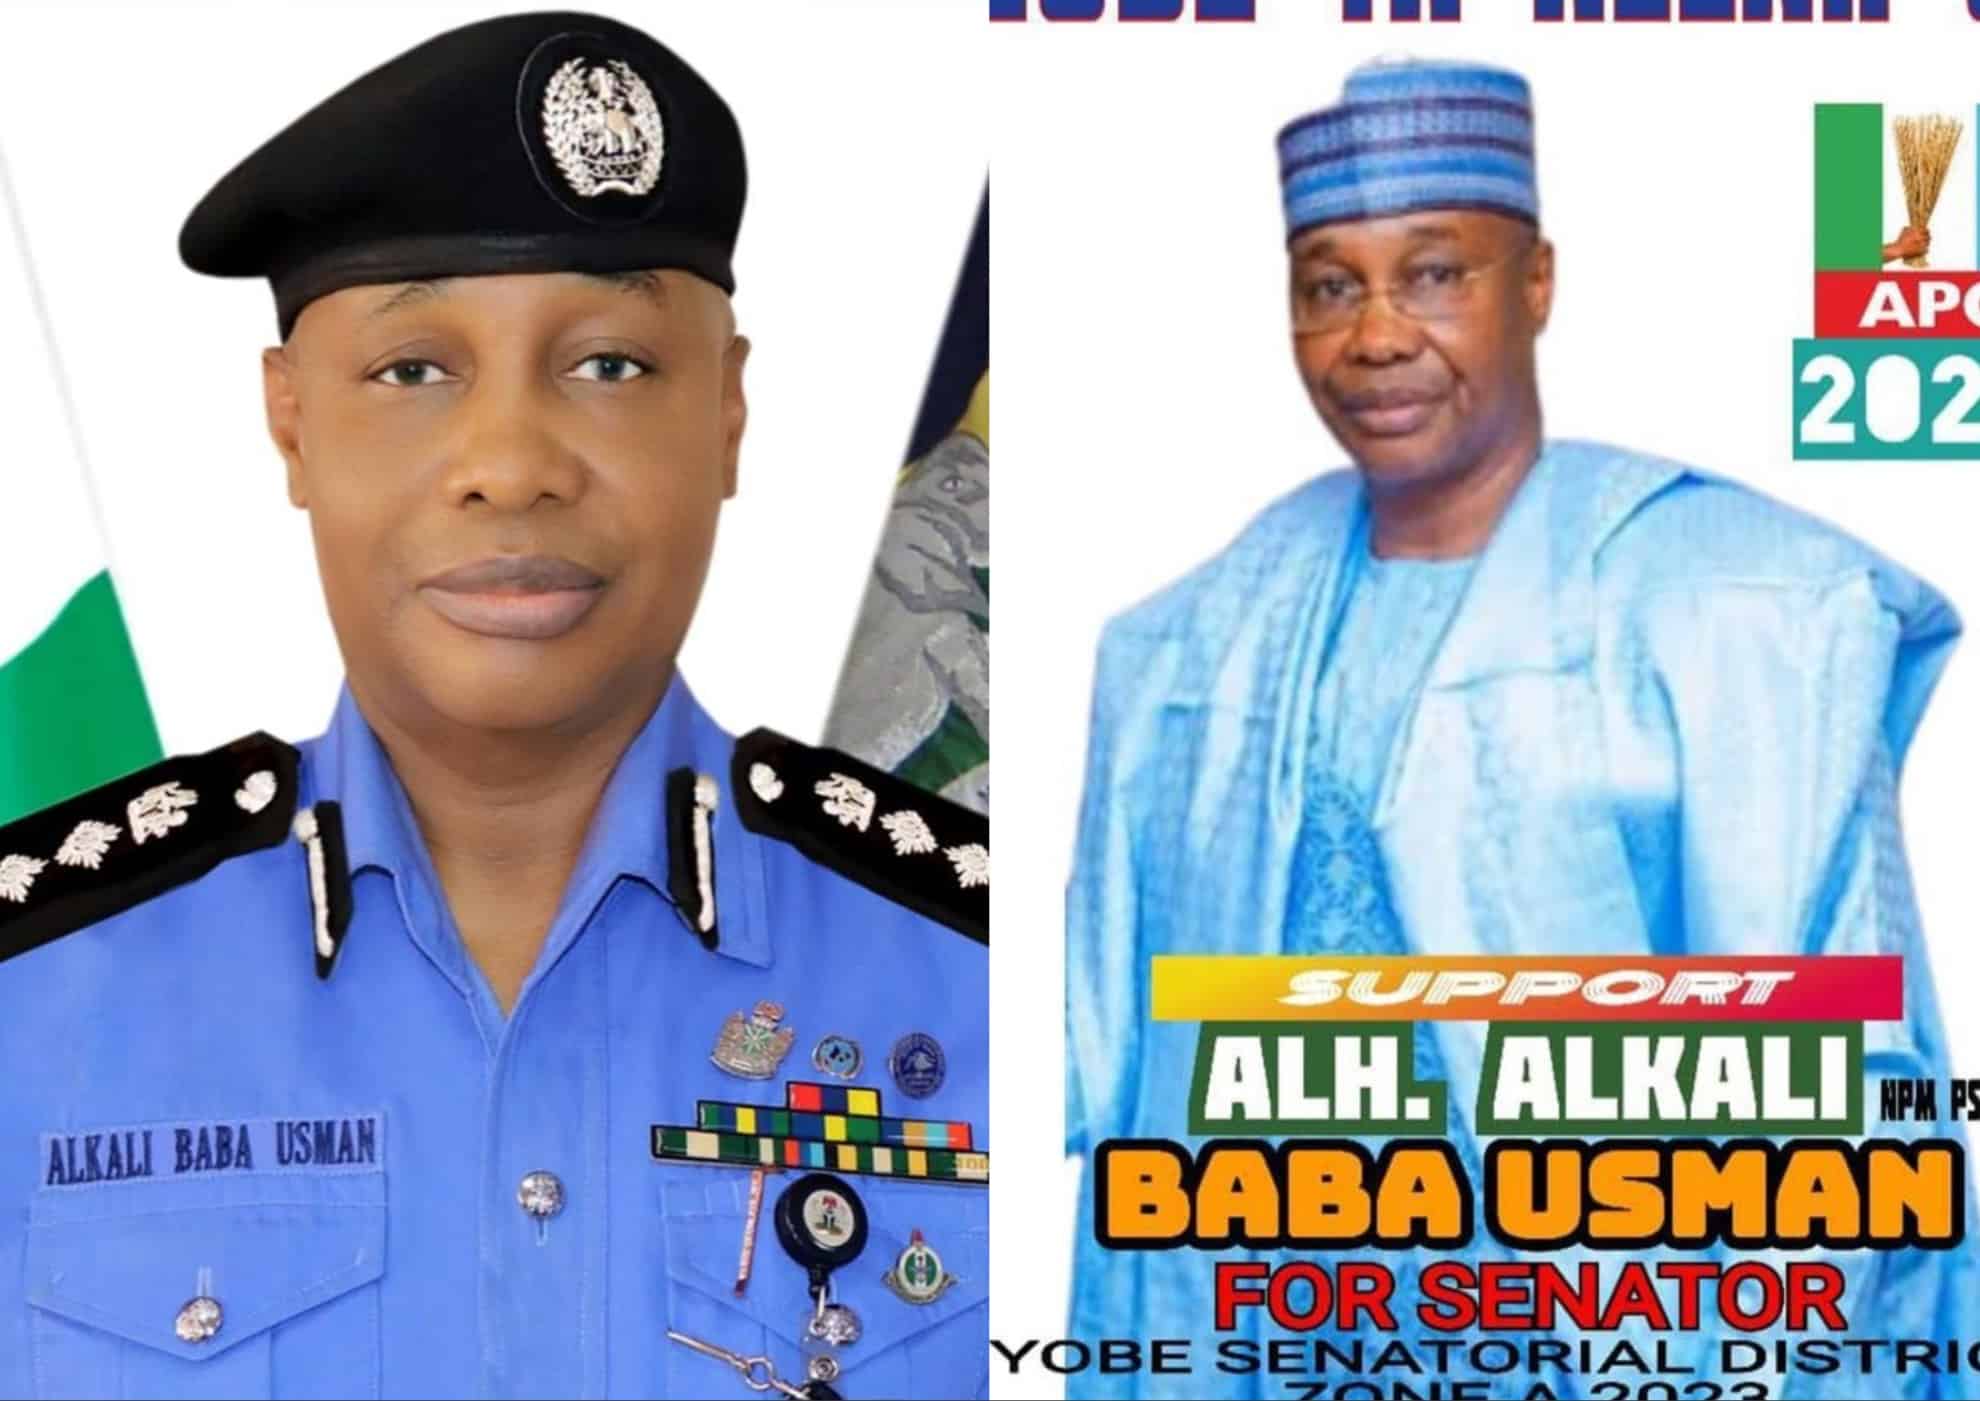 Reactions As Poster Of Former IGP Of Police Contesting For Senatorial Post Emerges